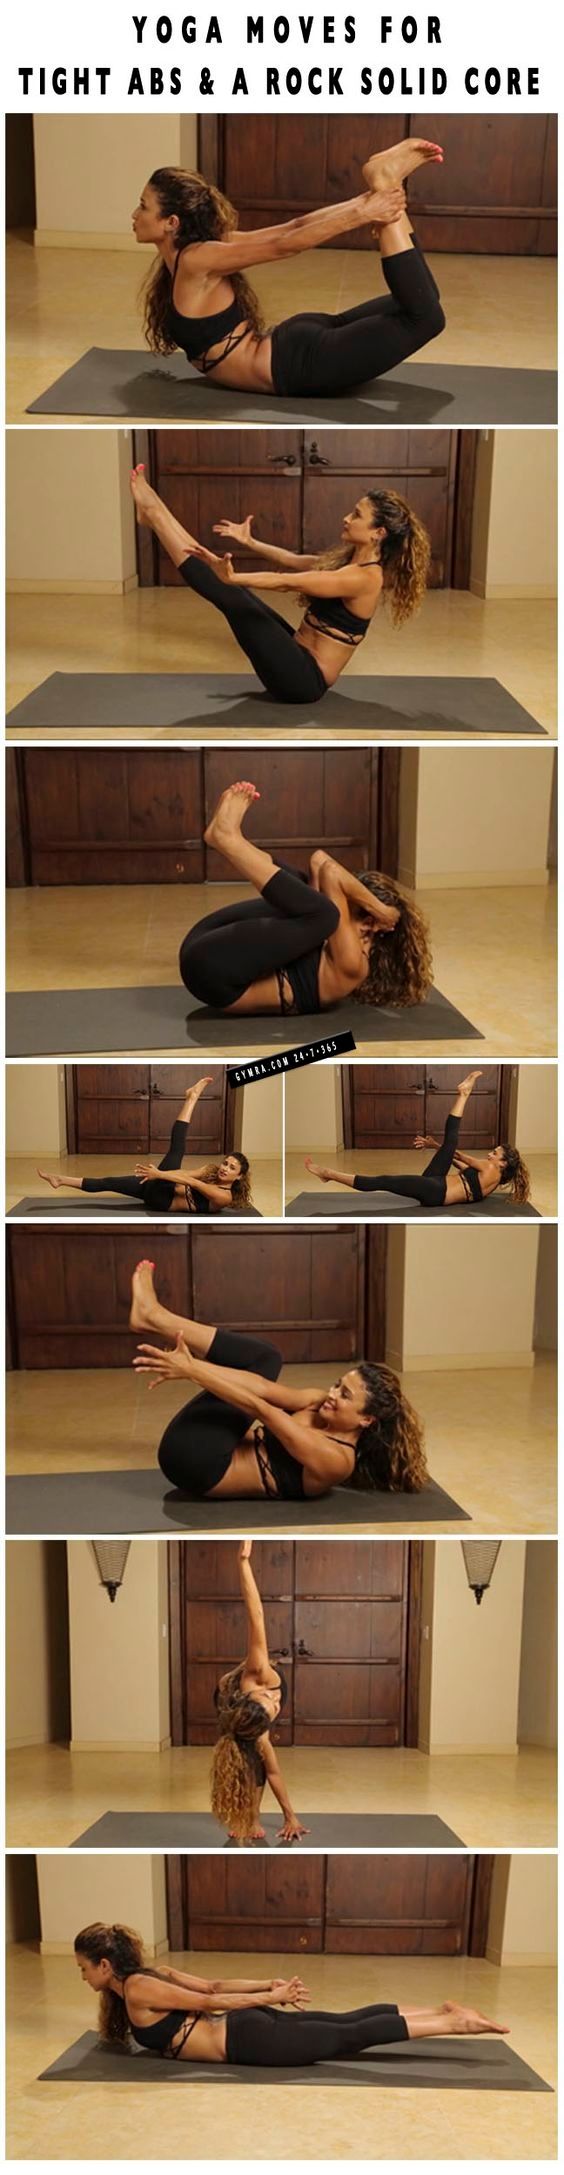 Yoga Moves for Tight Abs